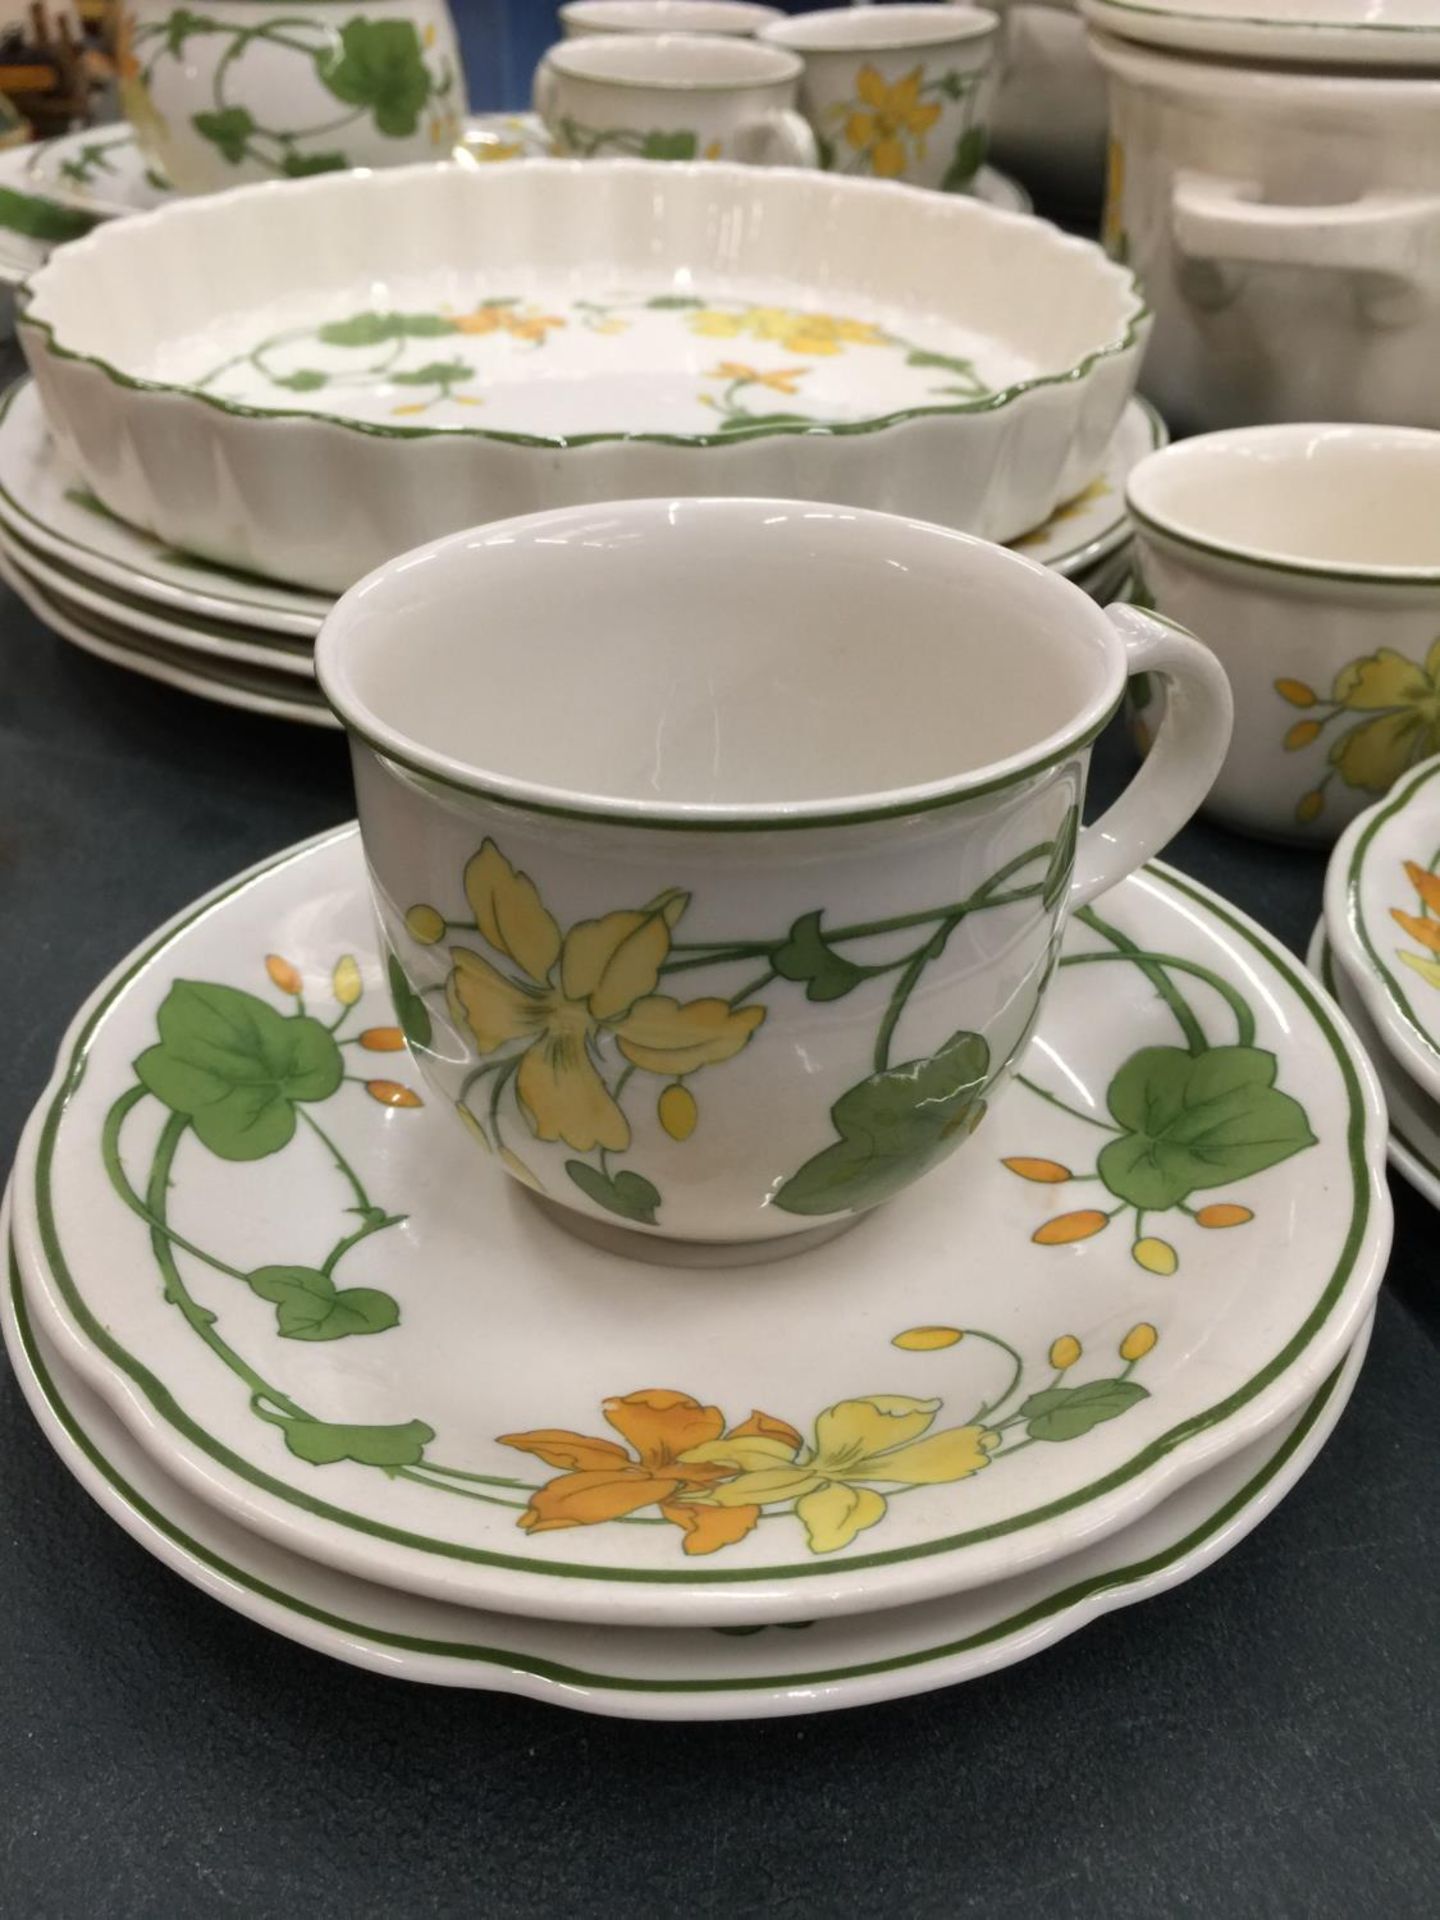 A LARGE QUANTITY OF VILLEROY AND BOCH 'GERANIUM' DINNERWARE TO INCLUDE PLATES, CUPS, SAUCERS, - Image 5 of 8